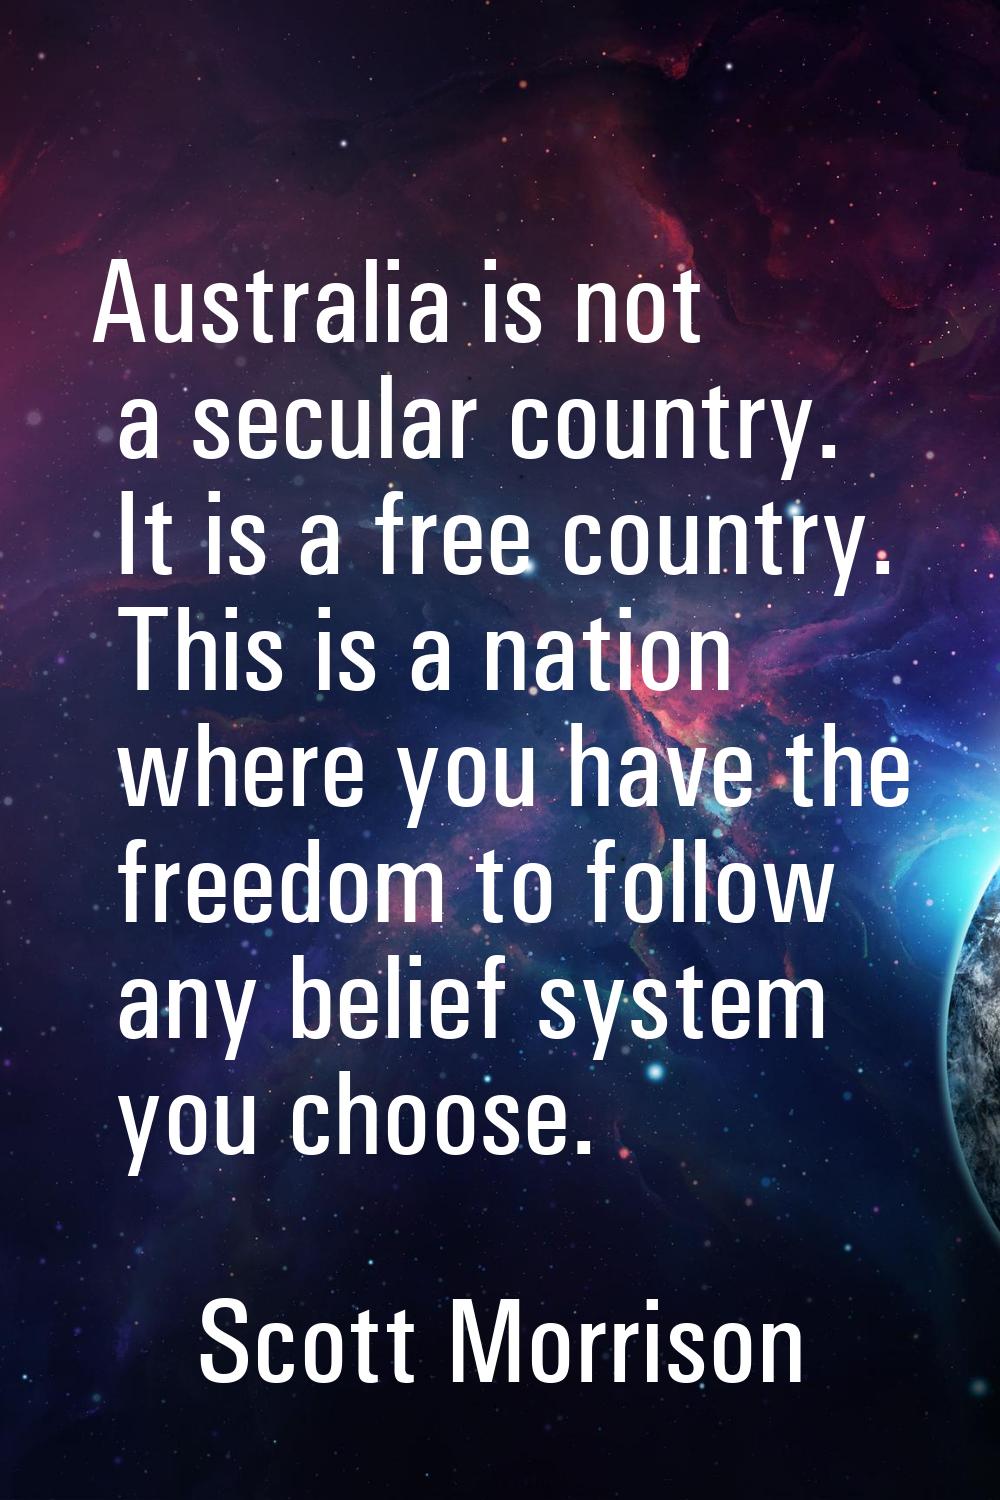 Australia is not a secular country. It is a free country. This is a nation where you have the freed